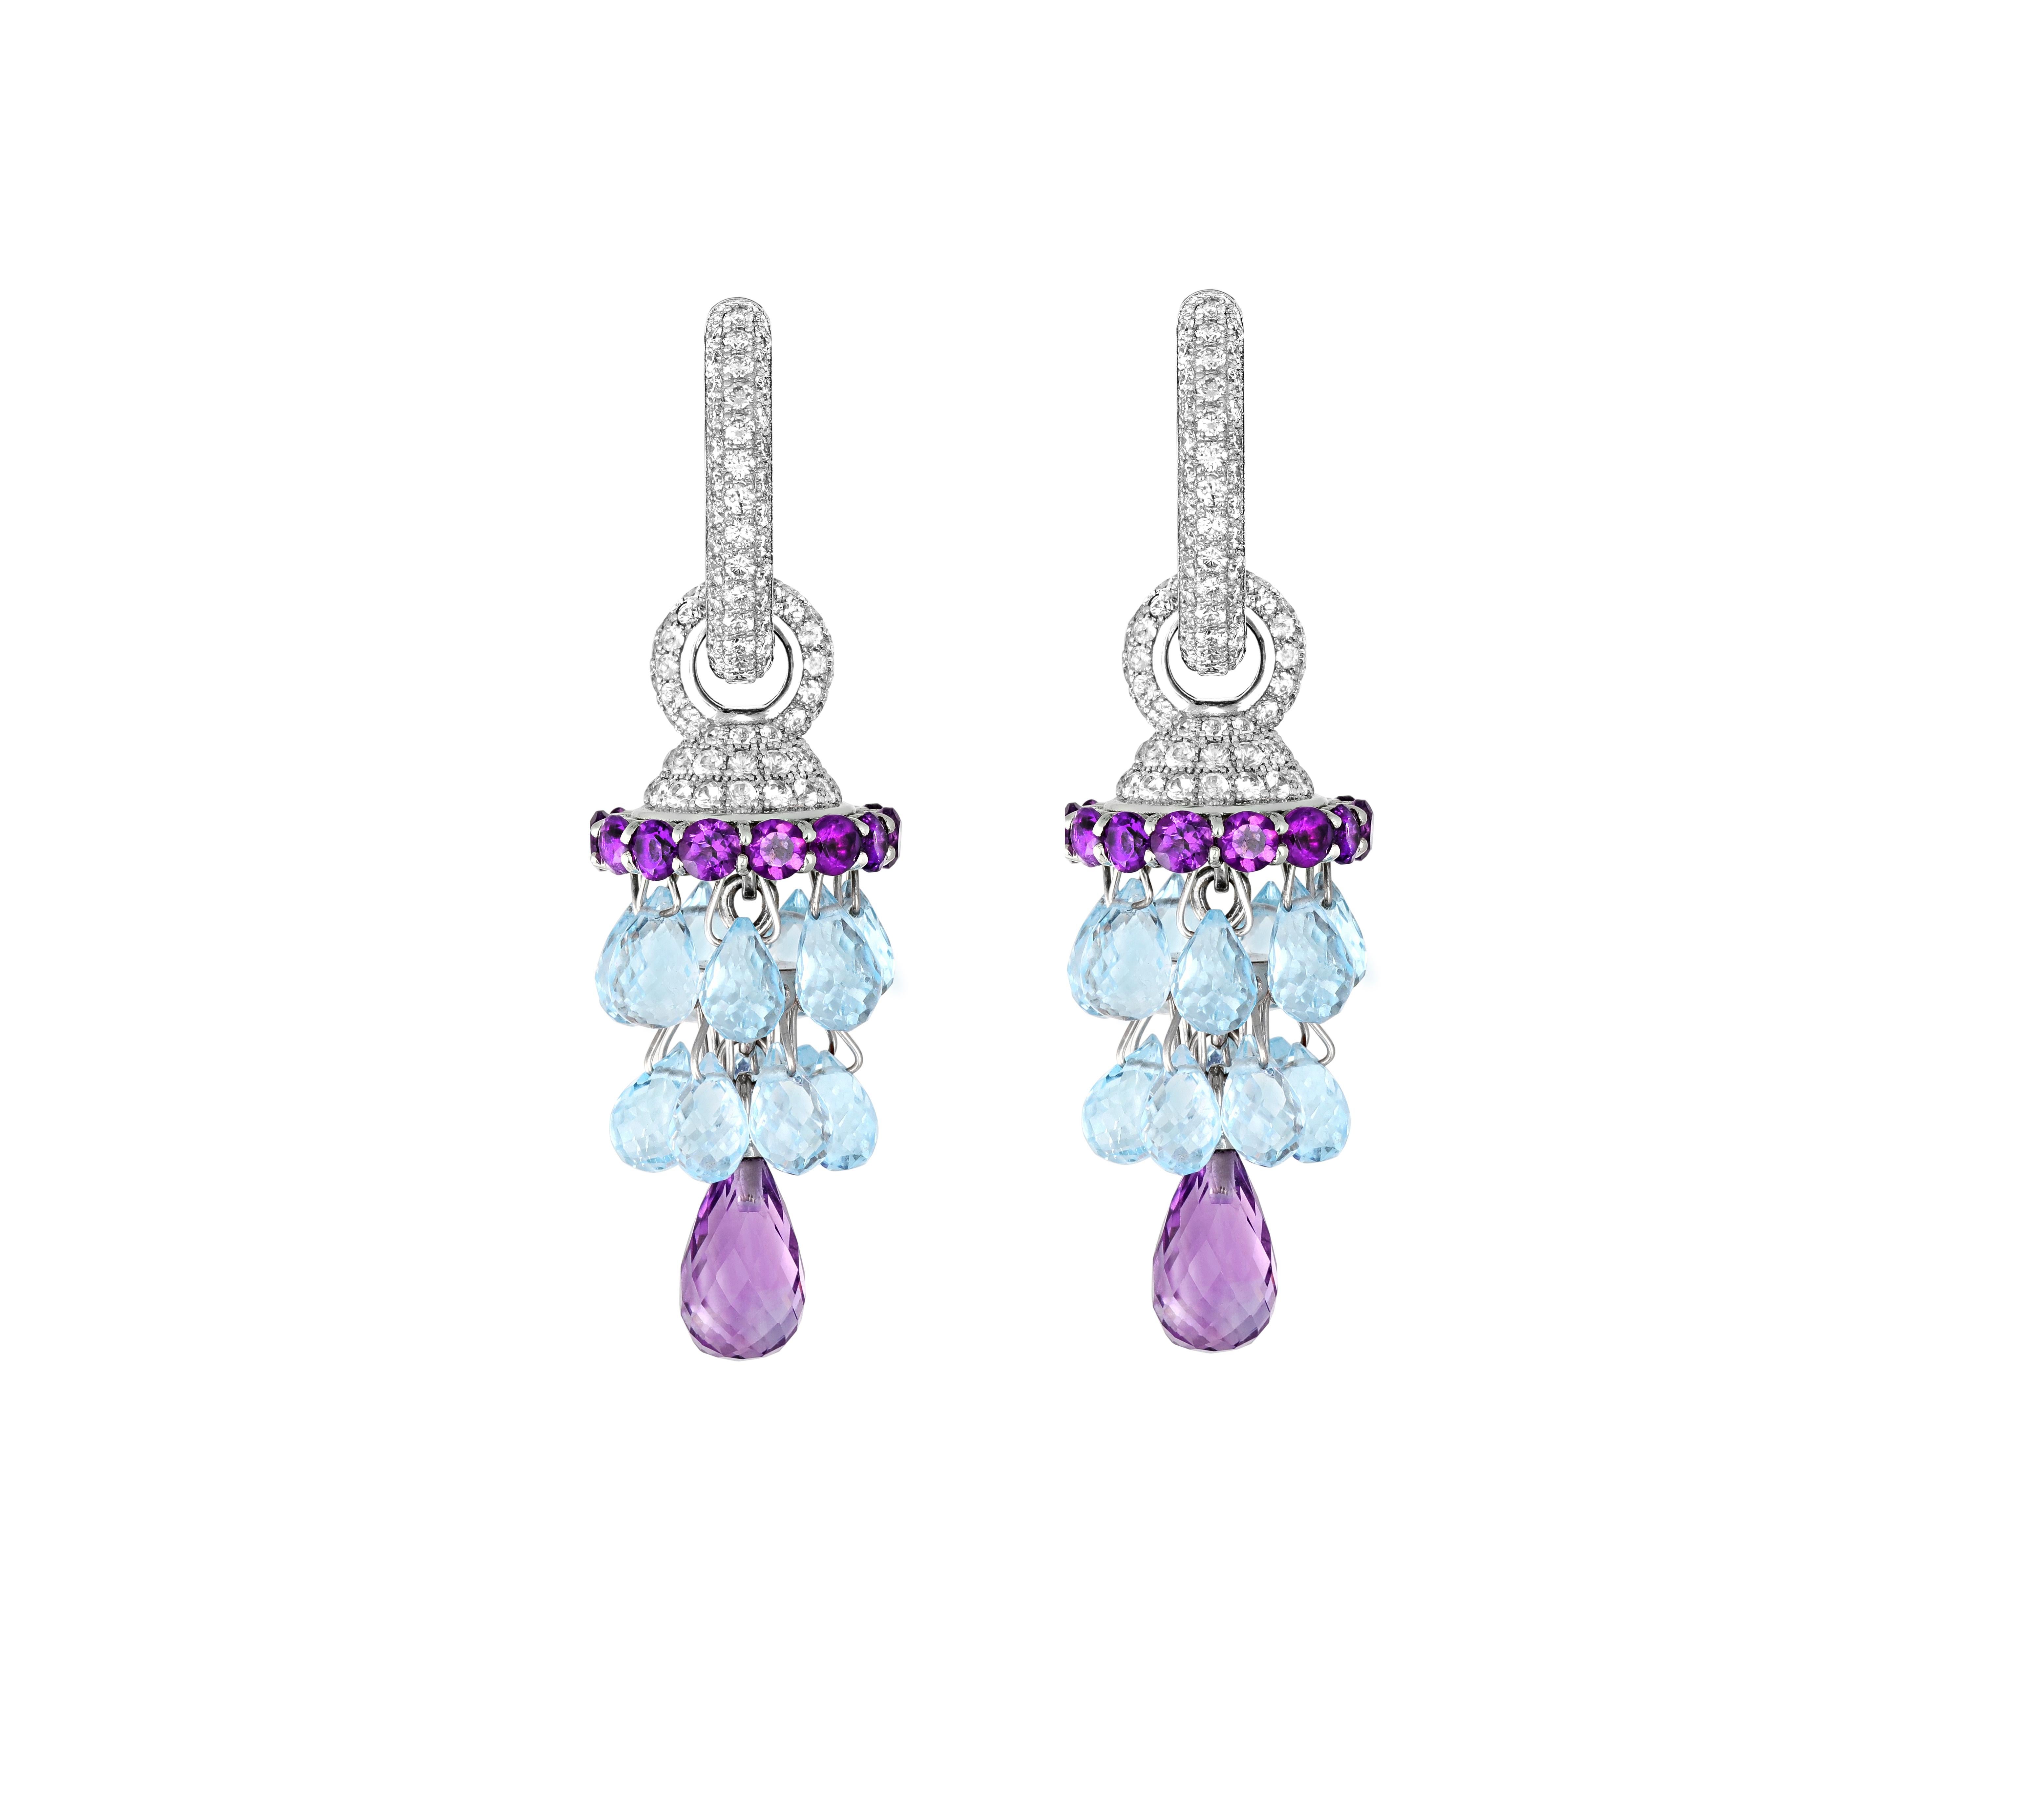 18kt solid gold Transformable Chandelier earrings with briolette natural topazes, amethysts and diamonds. 18 kt solid gold: you can choose yellow or white. All gemstones are natural. Earrings can be worn in different ways: as a Chandelier earrings